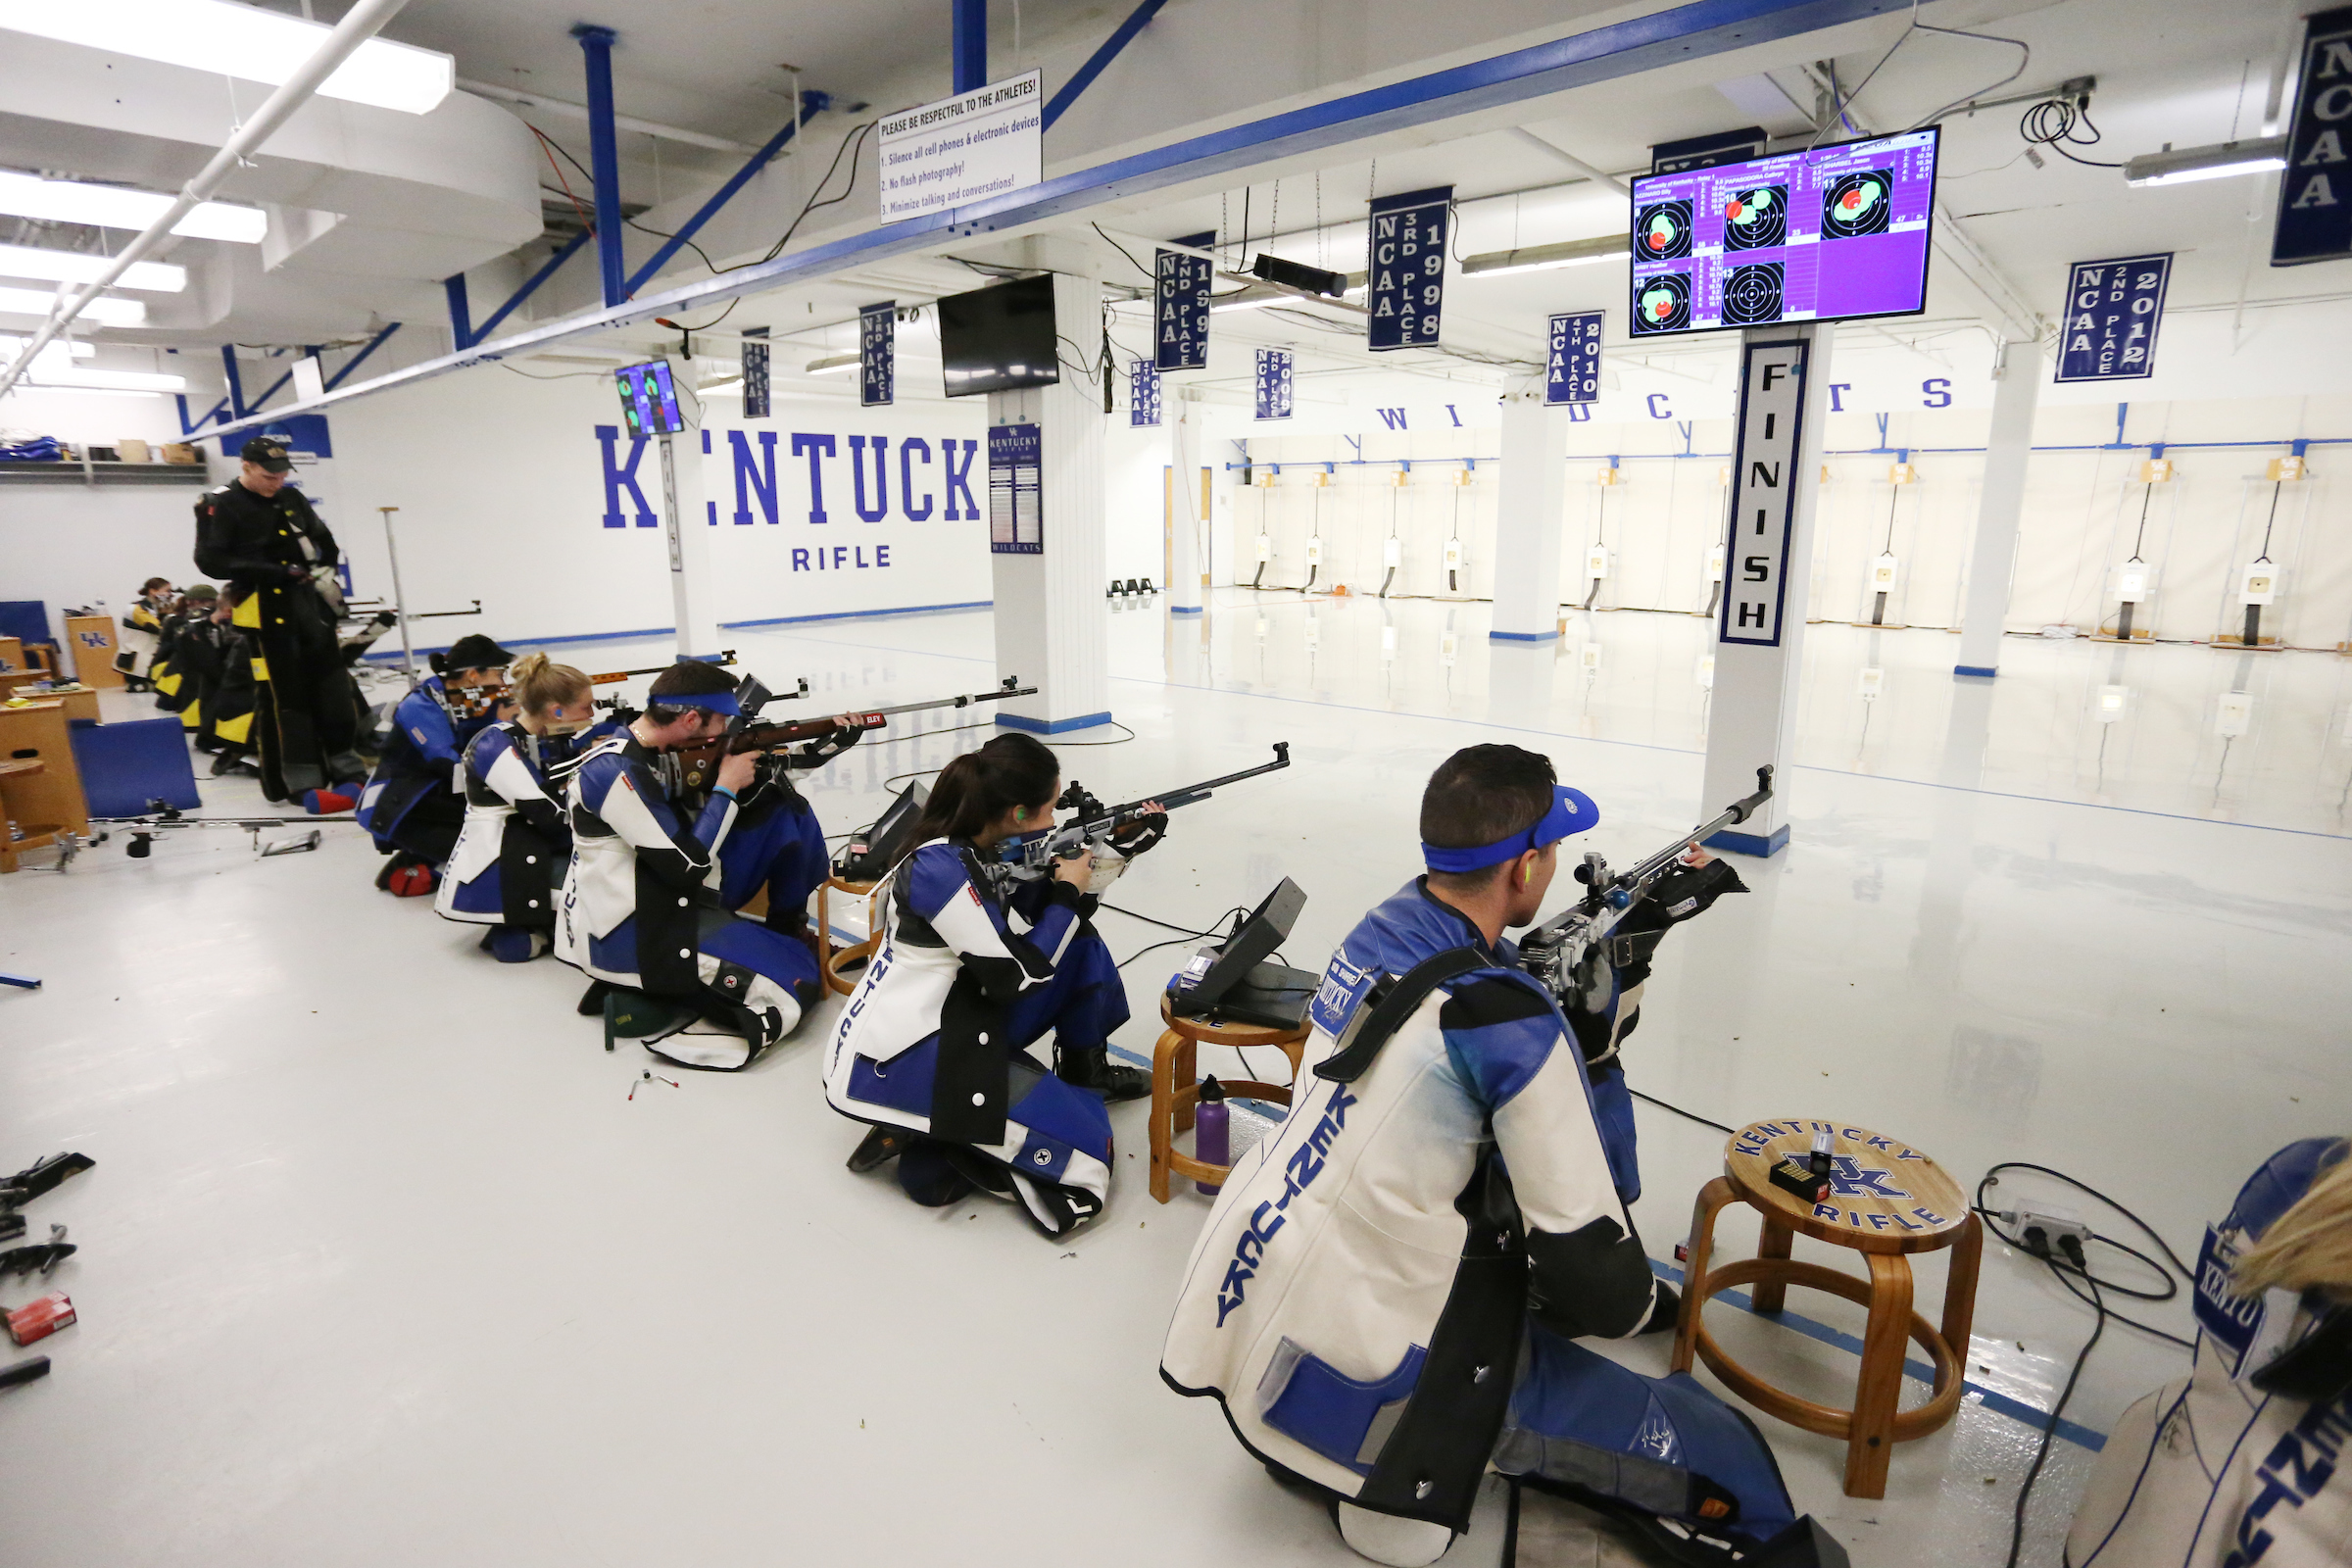 UK Rifle Wins at Home, Improves to 7-1